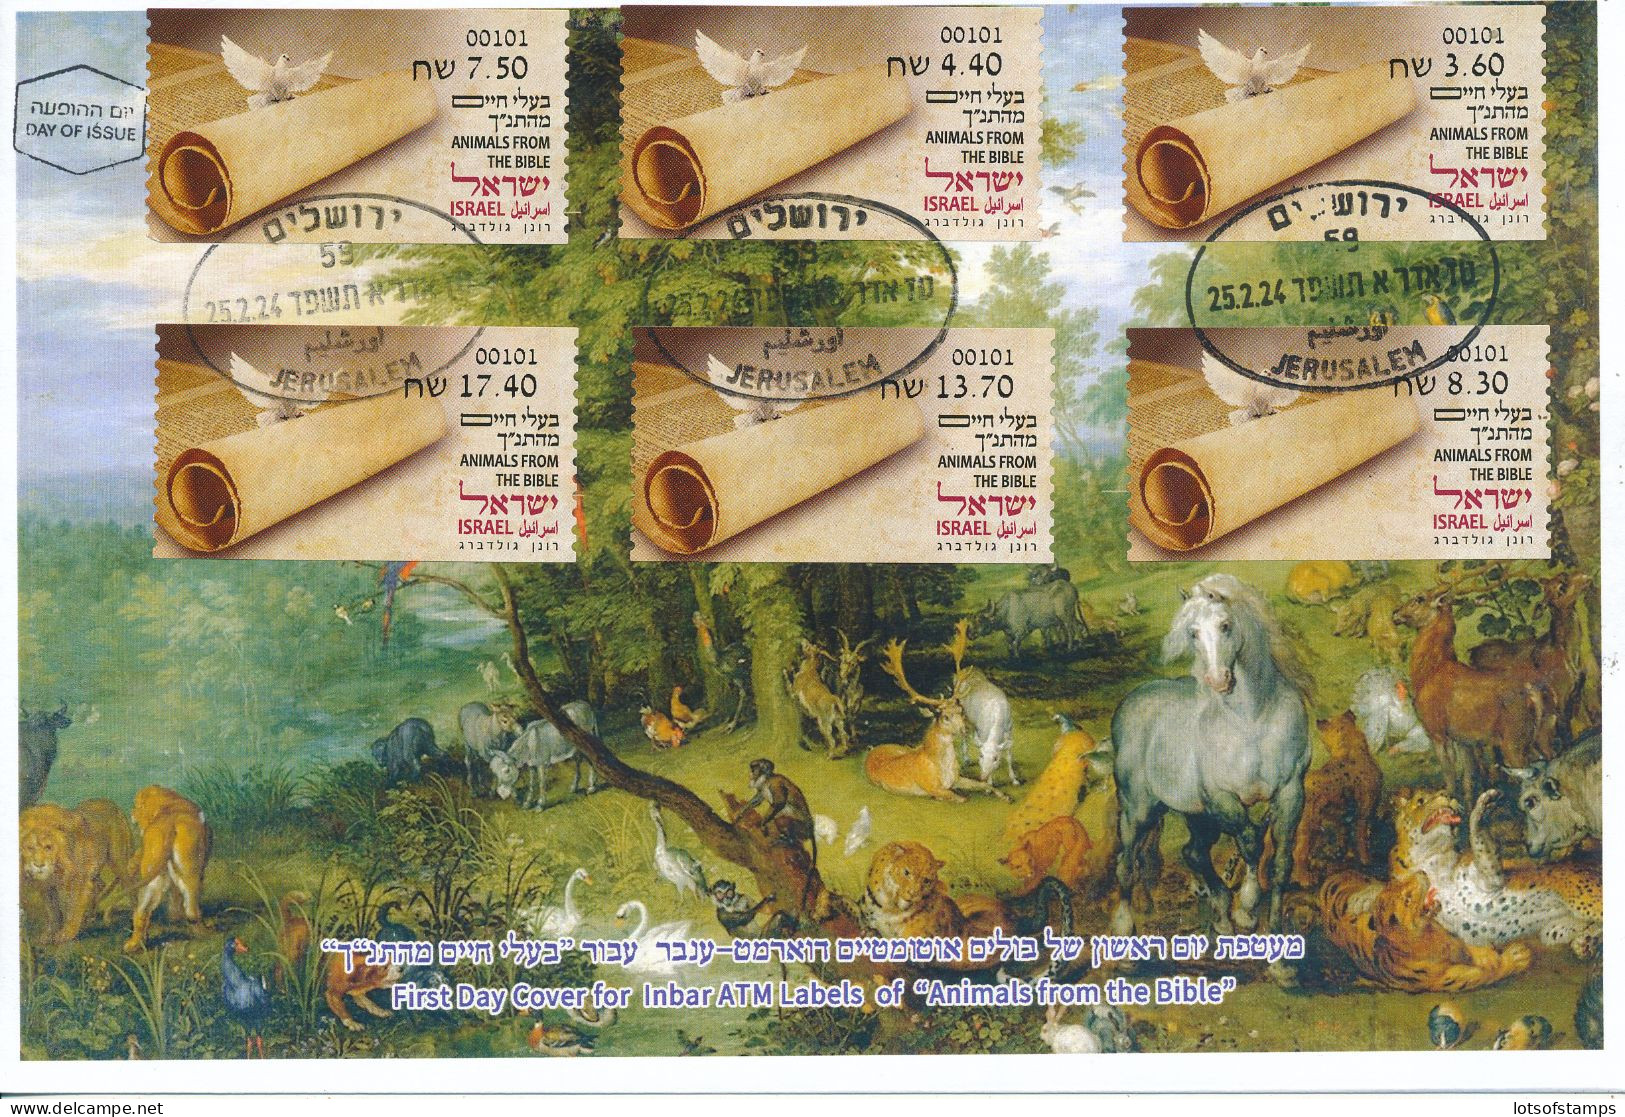 ISRAEL 2024 ANIMALS FROM THE BIBLE ATM LABEL JERUSALEM MACHINE 001 SET FDC - Neufs